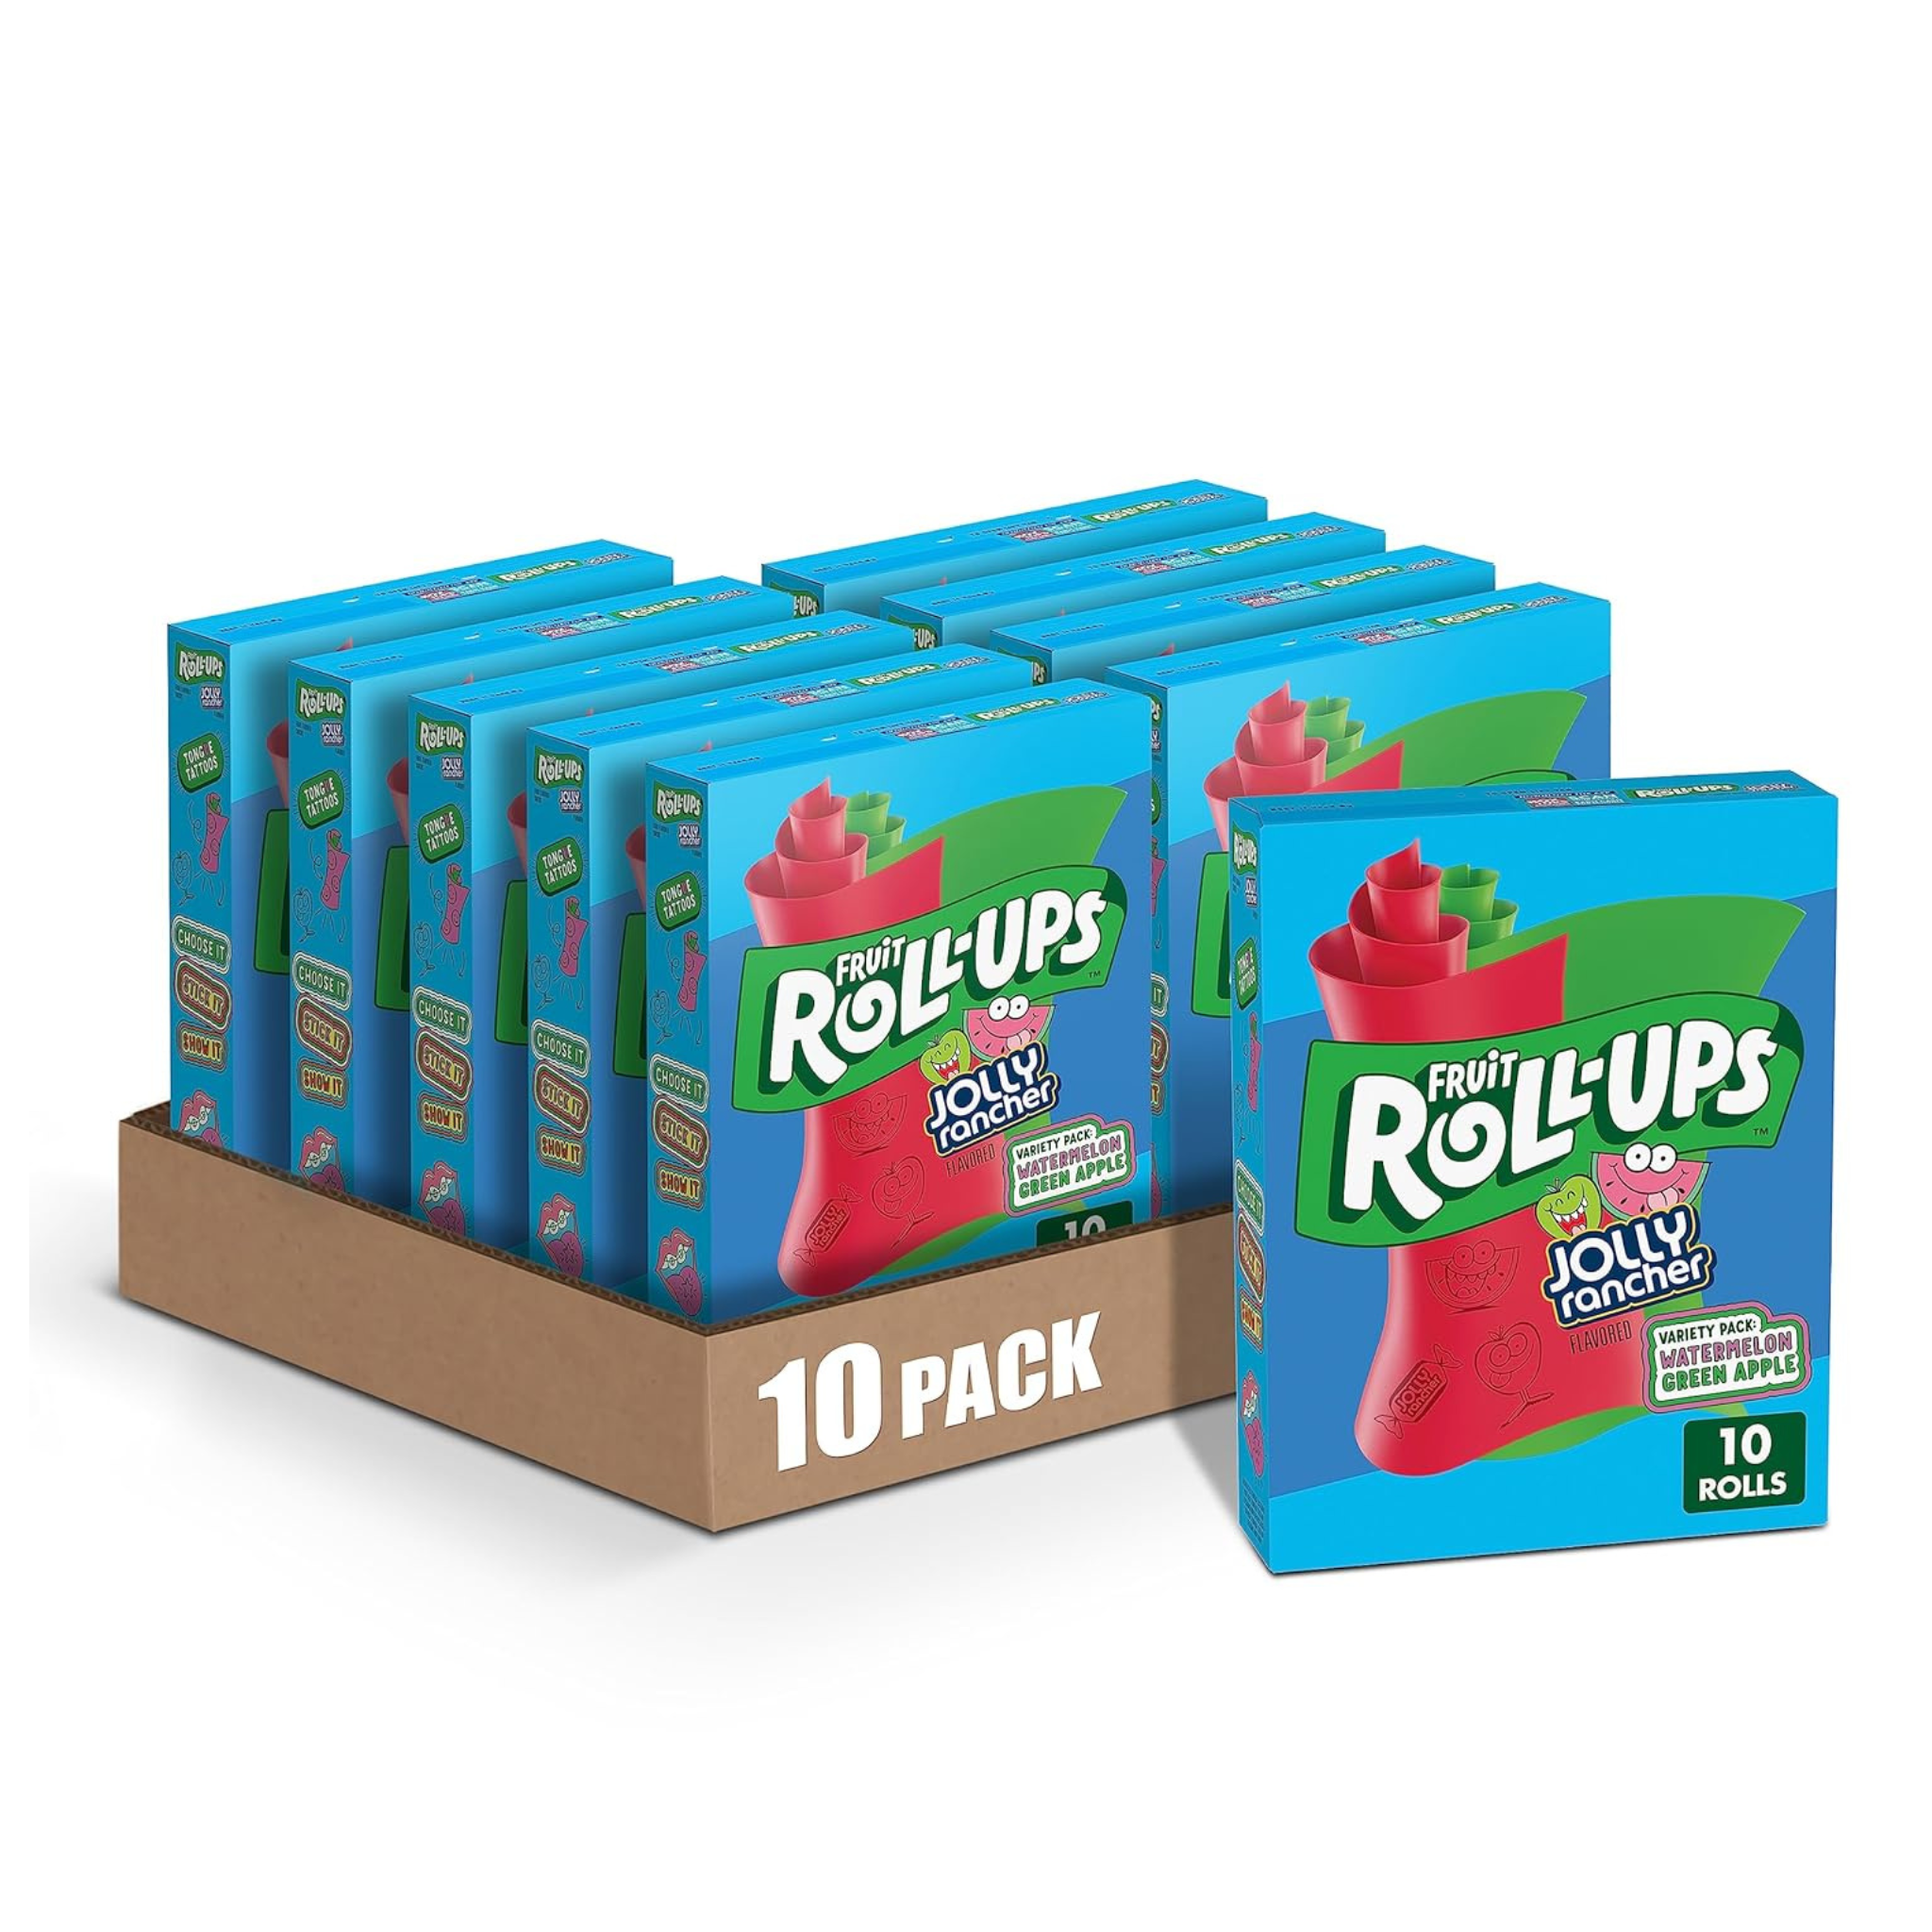 100 Fruit Roll-Ups Jolly Rancher Flavored Snacks